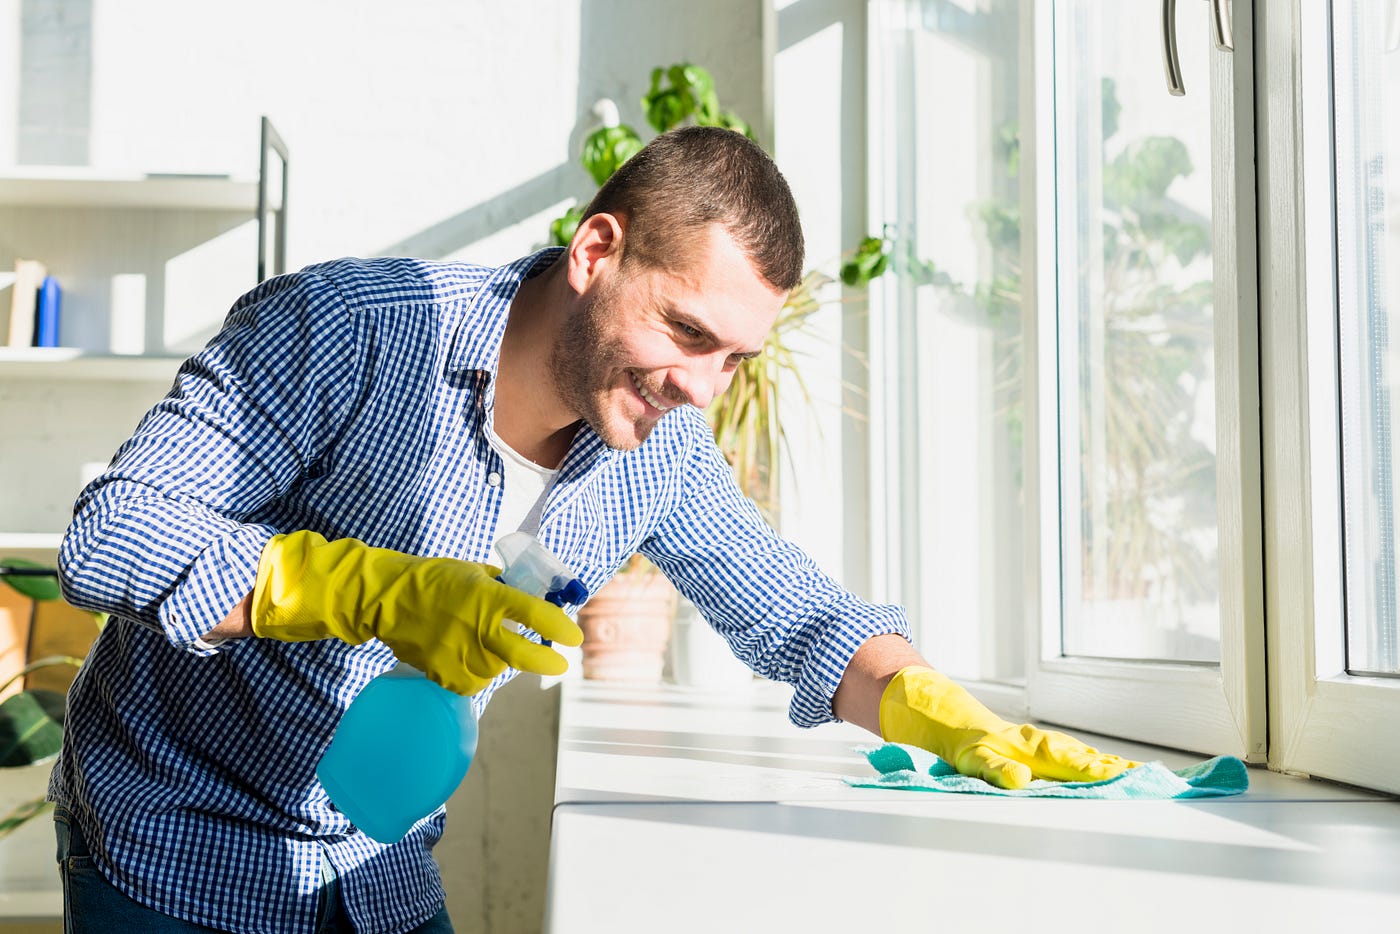 3 Benefits of order and cleanliness at home 